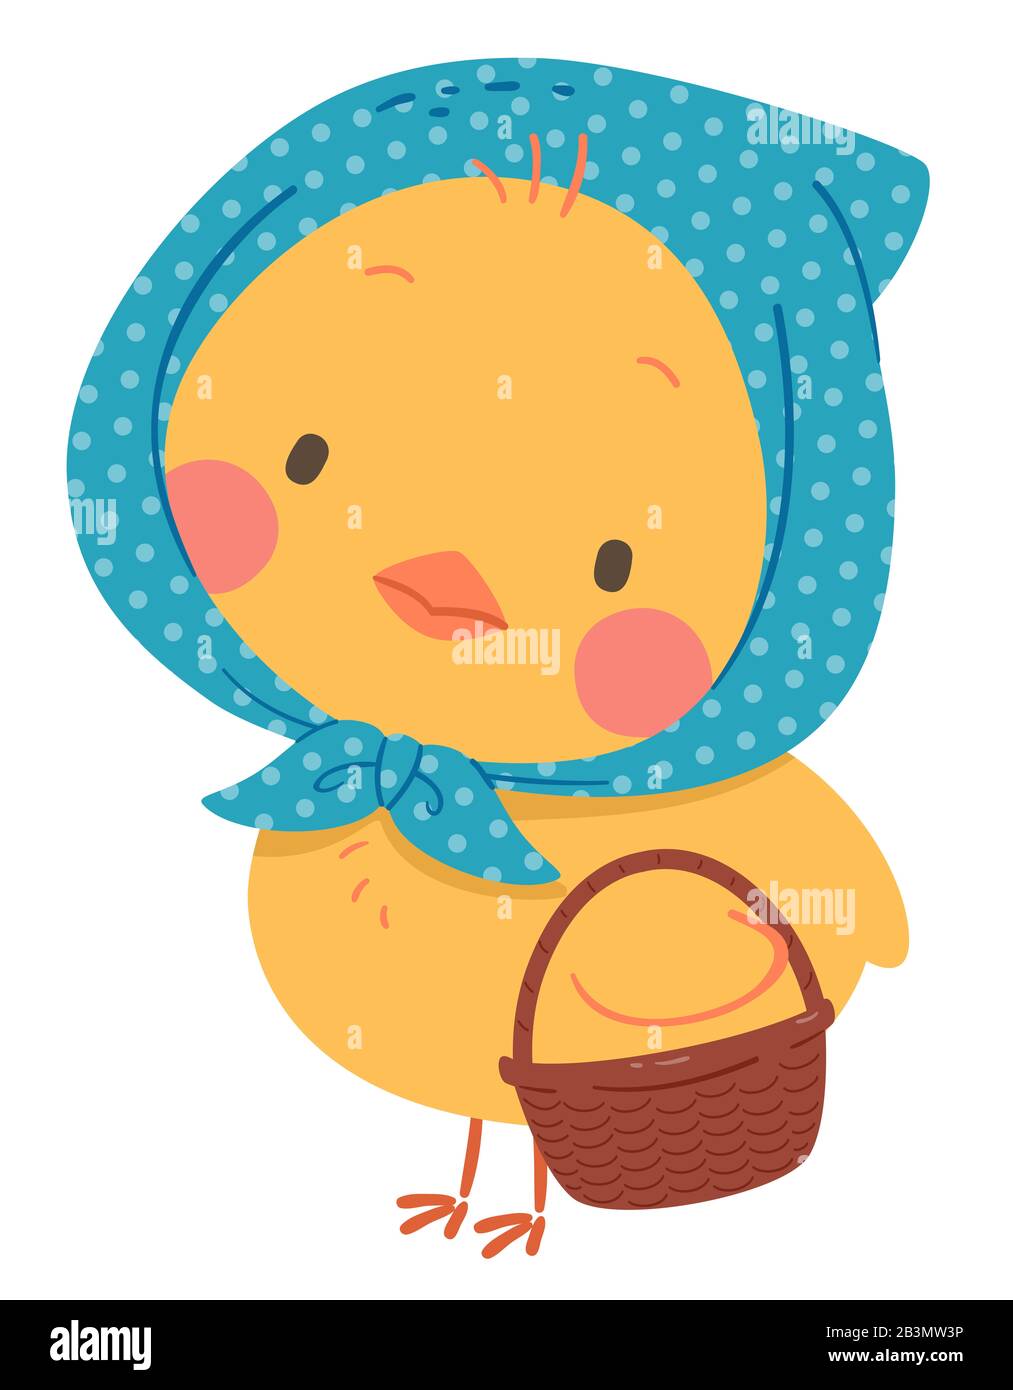 Illustration of a Cute Chick Wearing Handkerchief Headscarf and Holding a Basket for Easter Stock Photo